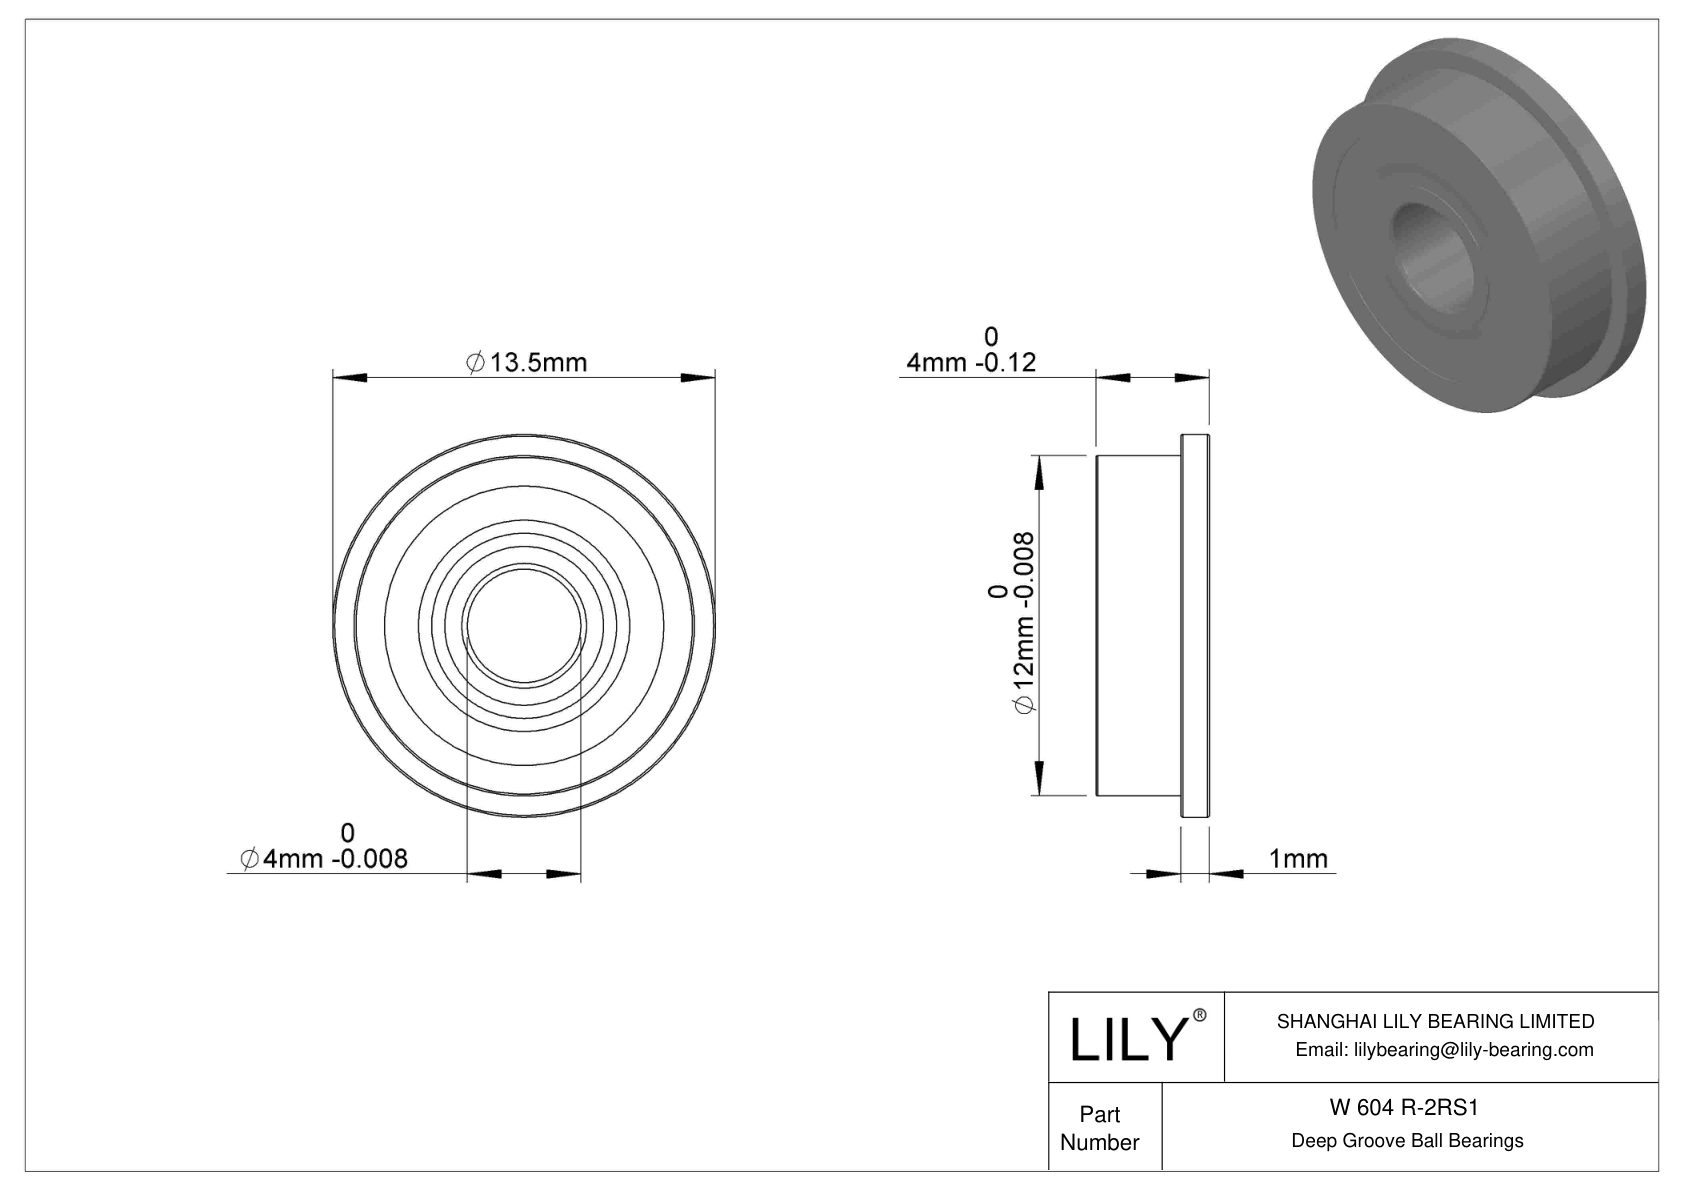 W 604 R-2RS1 Flanged Ball Bearings cad drawing